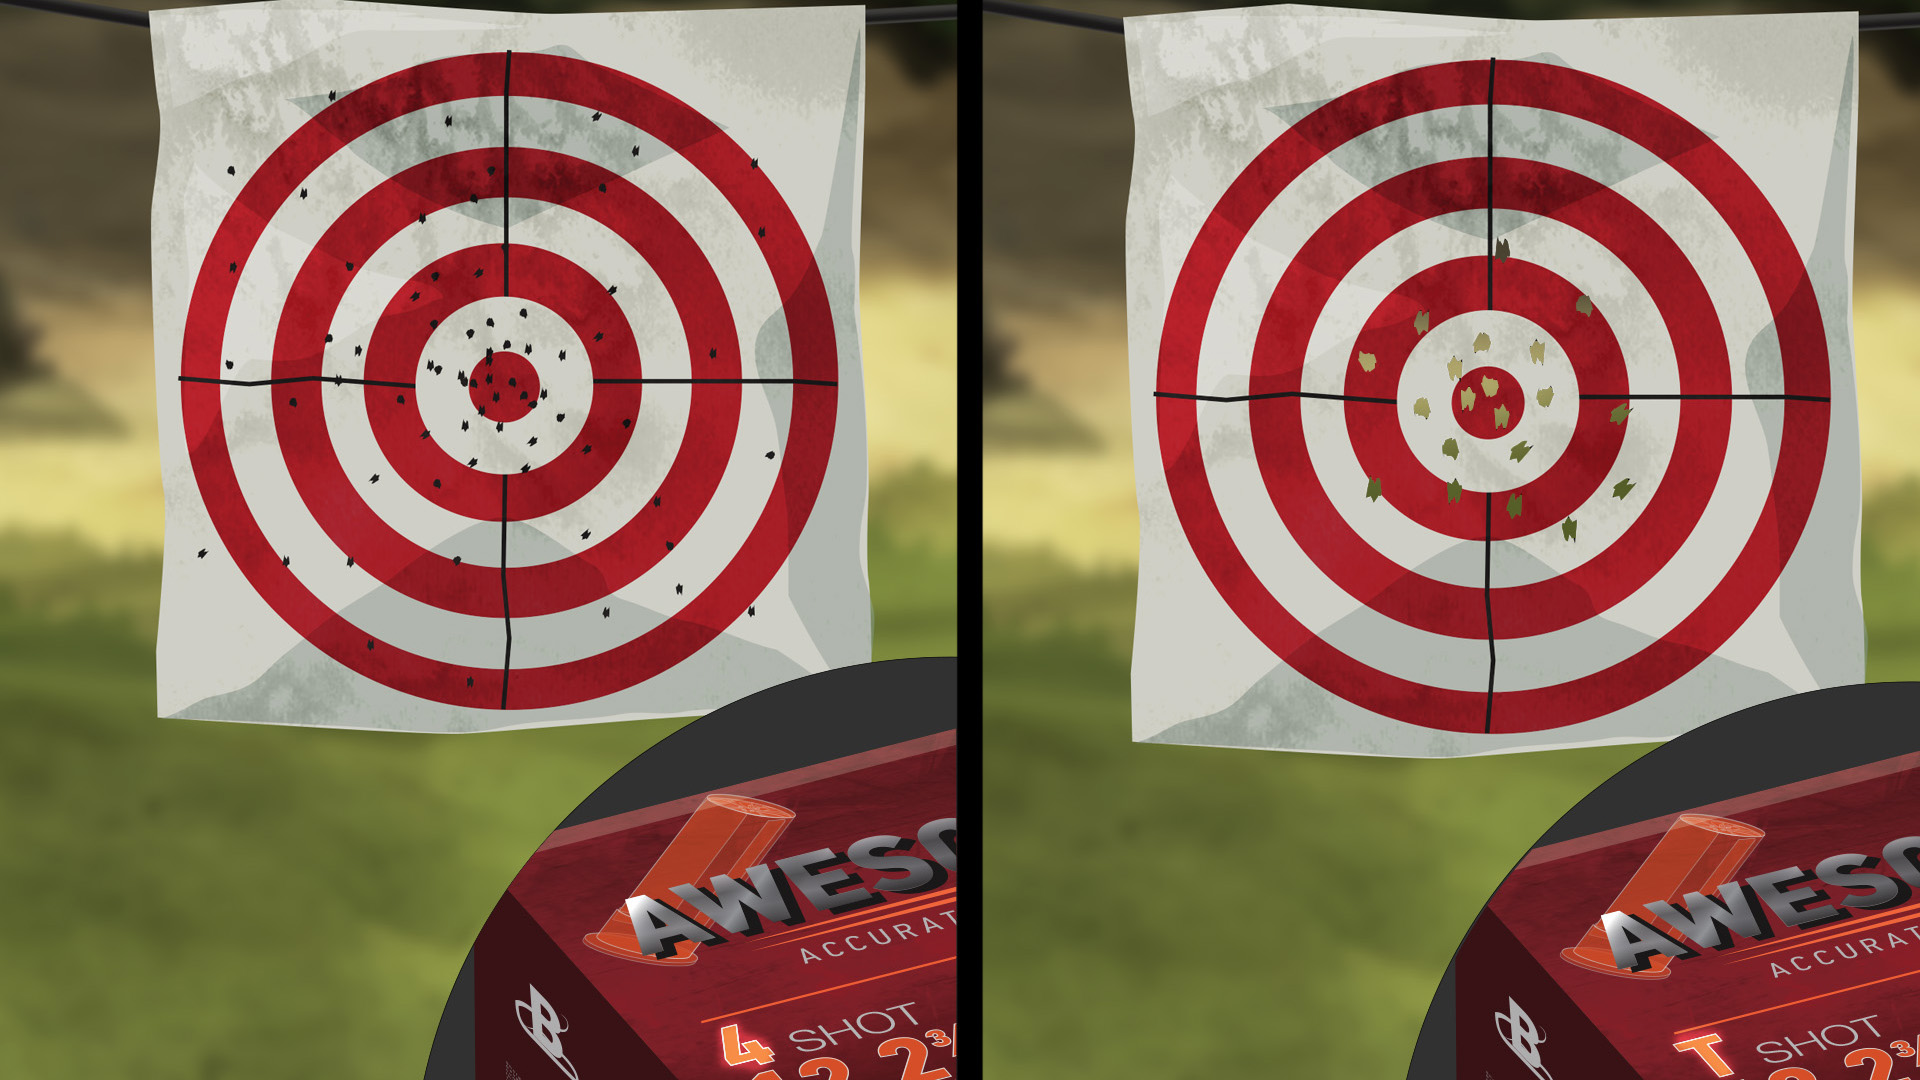 Illustration of a target with a wide shot pattern and another target with a tight shot pattern and their corresponding boxes of shotshells.